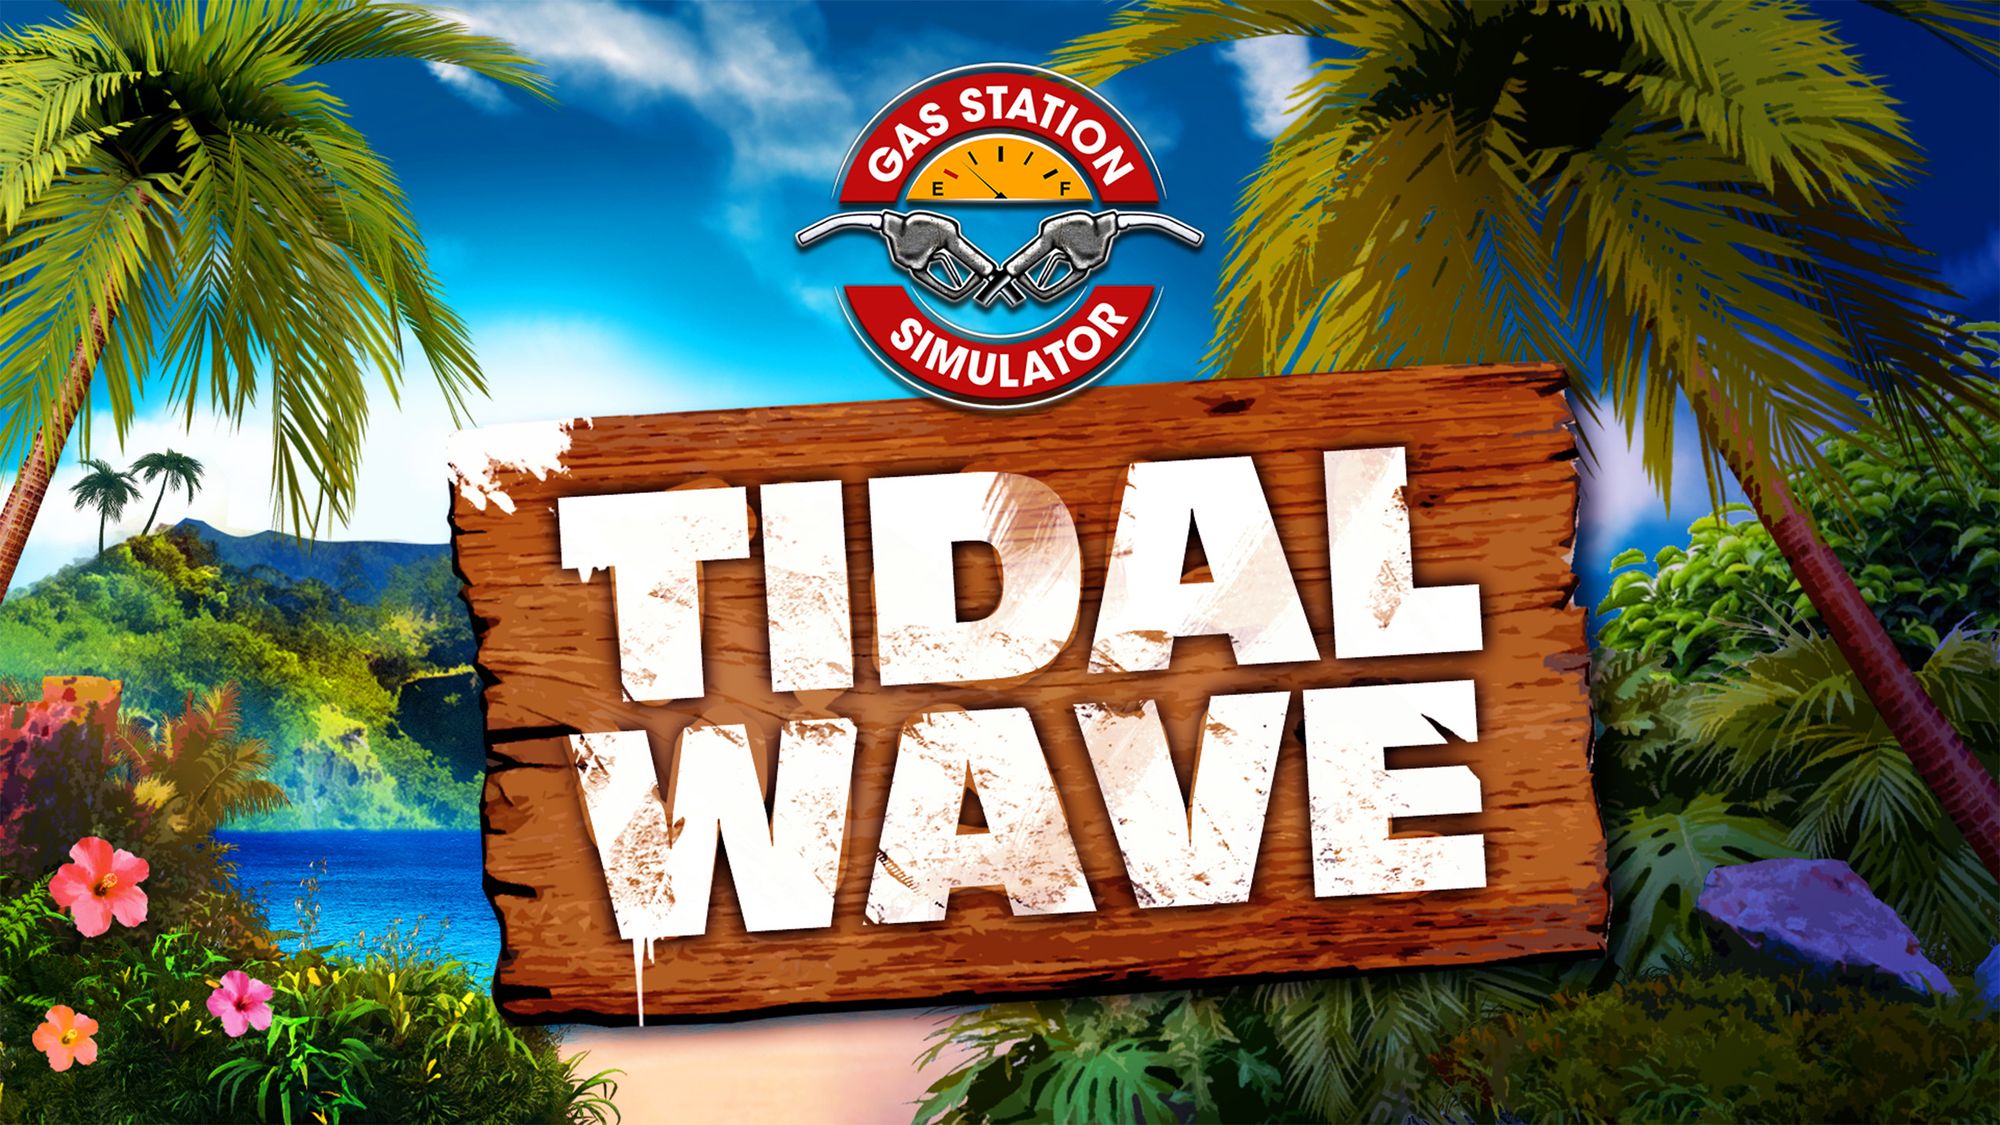 Dive into the new Tidal Wave DLC with Gas Station Simulator